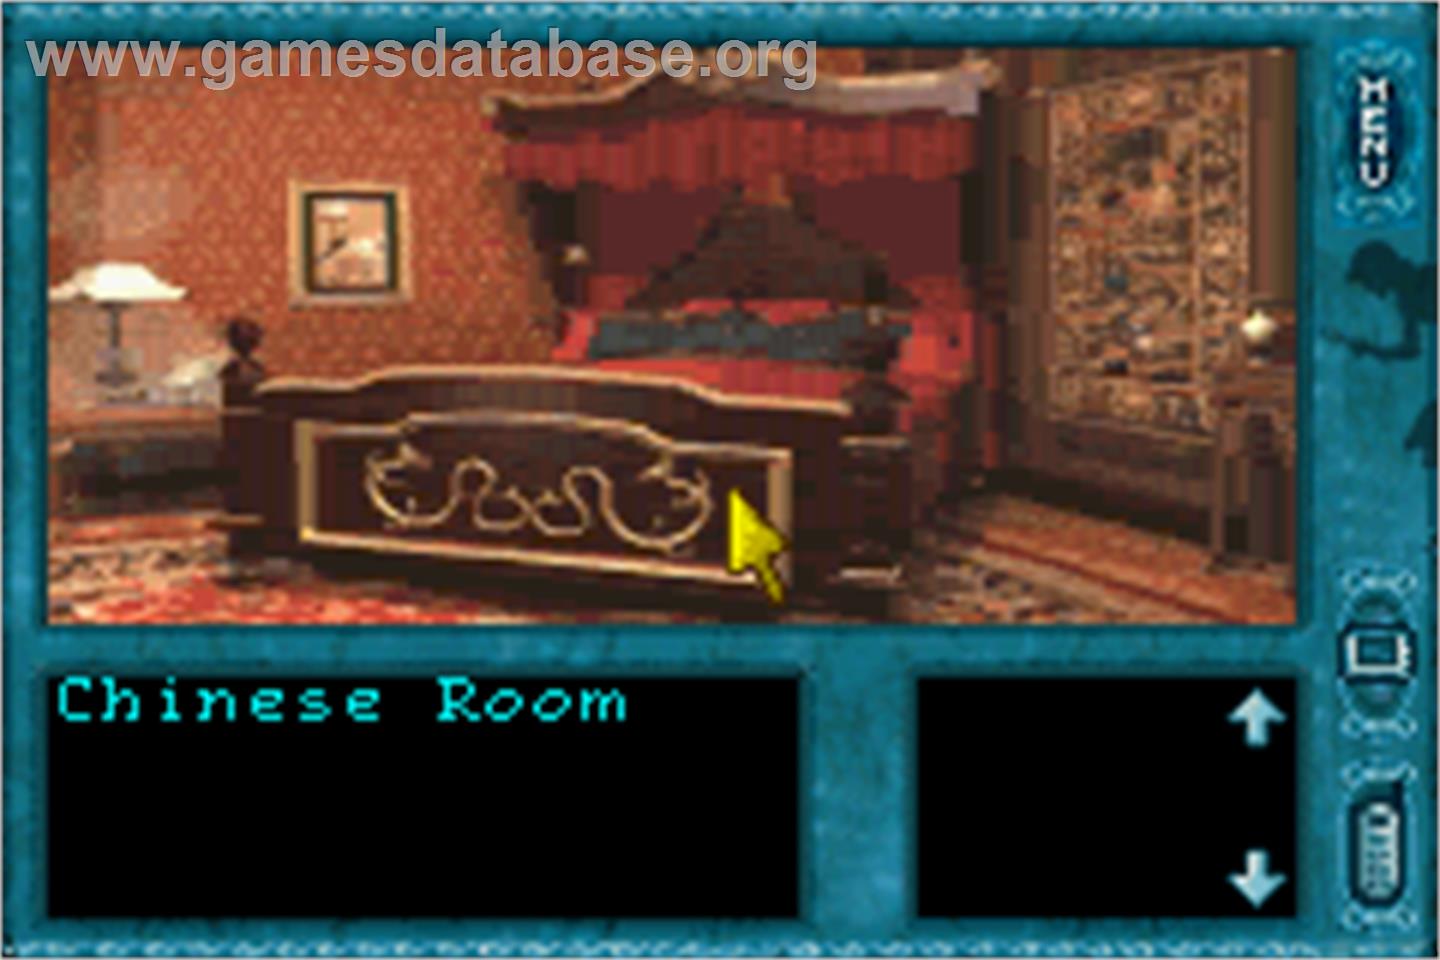 Nancy Drew: Message in a Haunted Mansion - Nintendo Game Boy Advance - Artwork - In Game